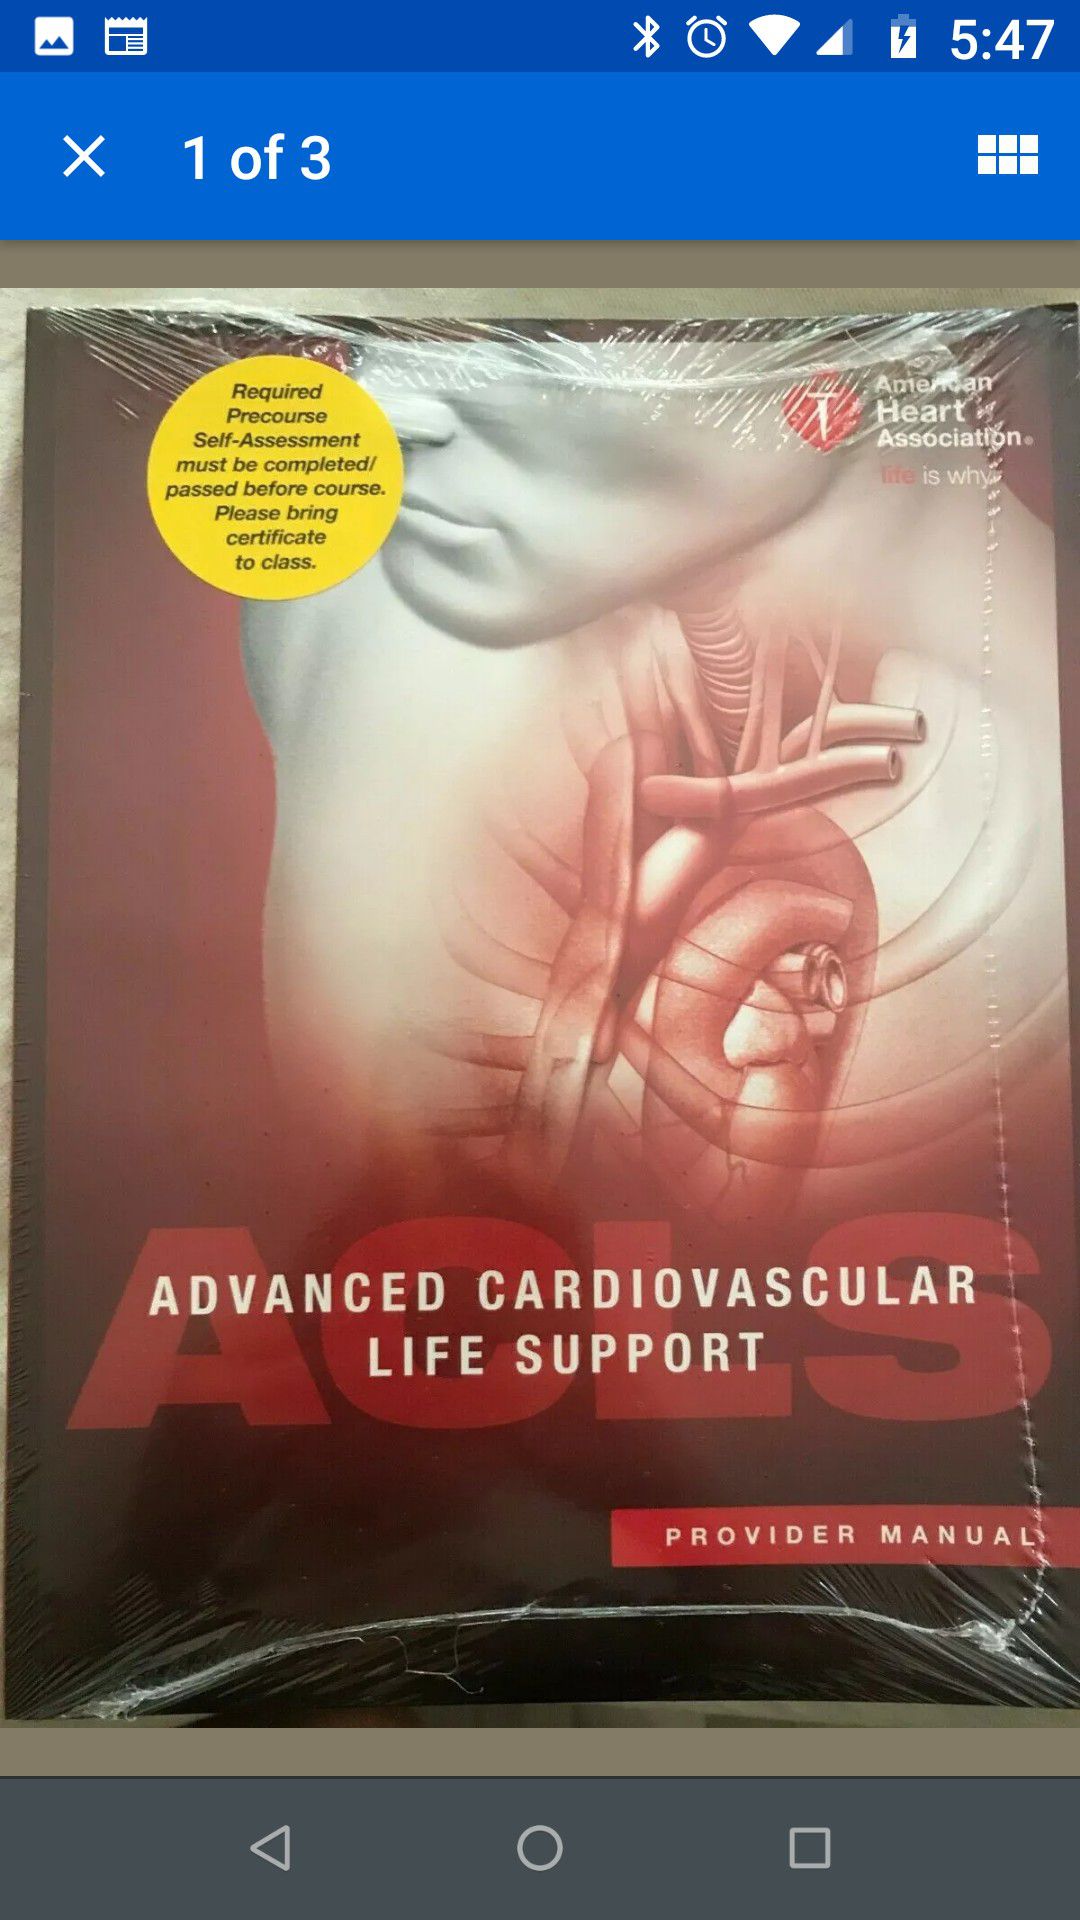 Advanced Cardiovascular Life Support Provider's Manual, Current/2015 Standards, New.